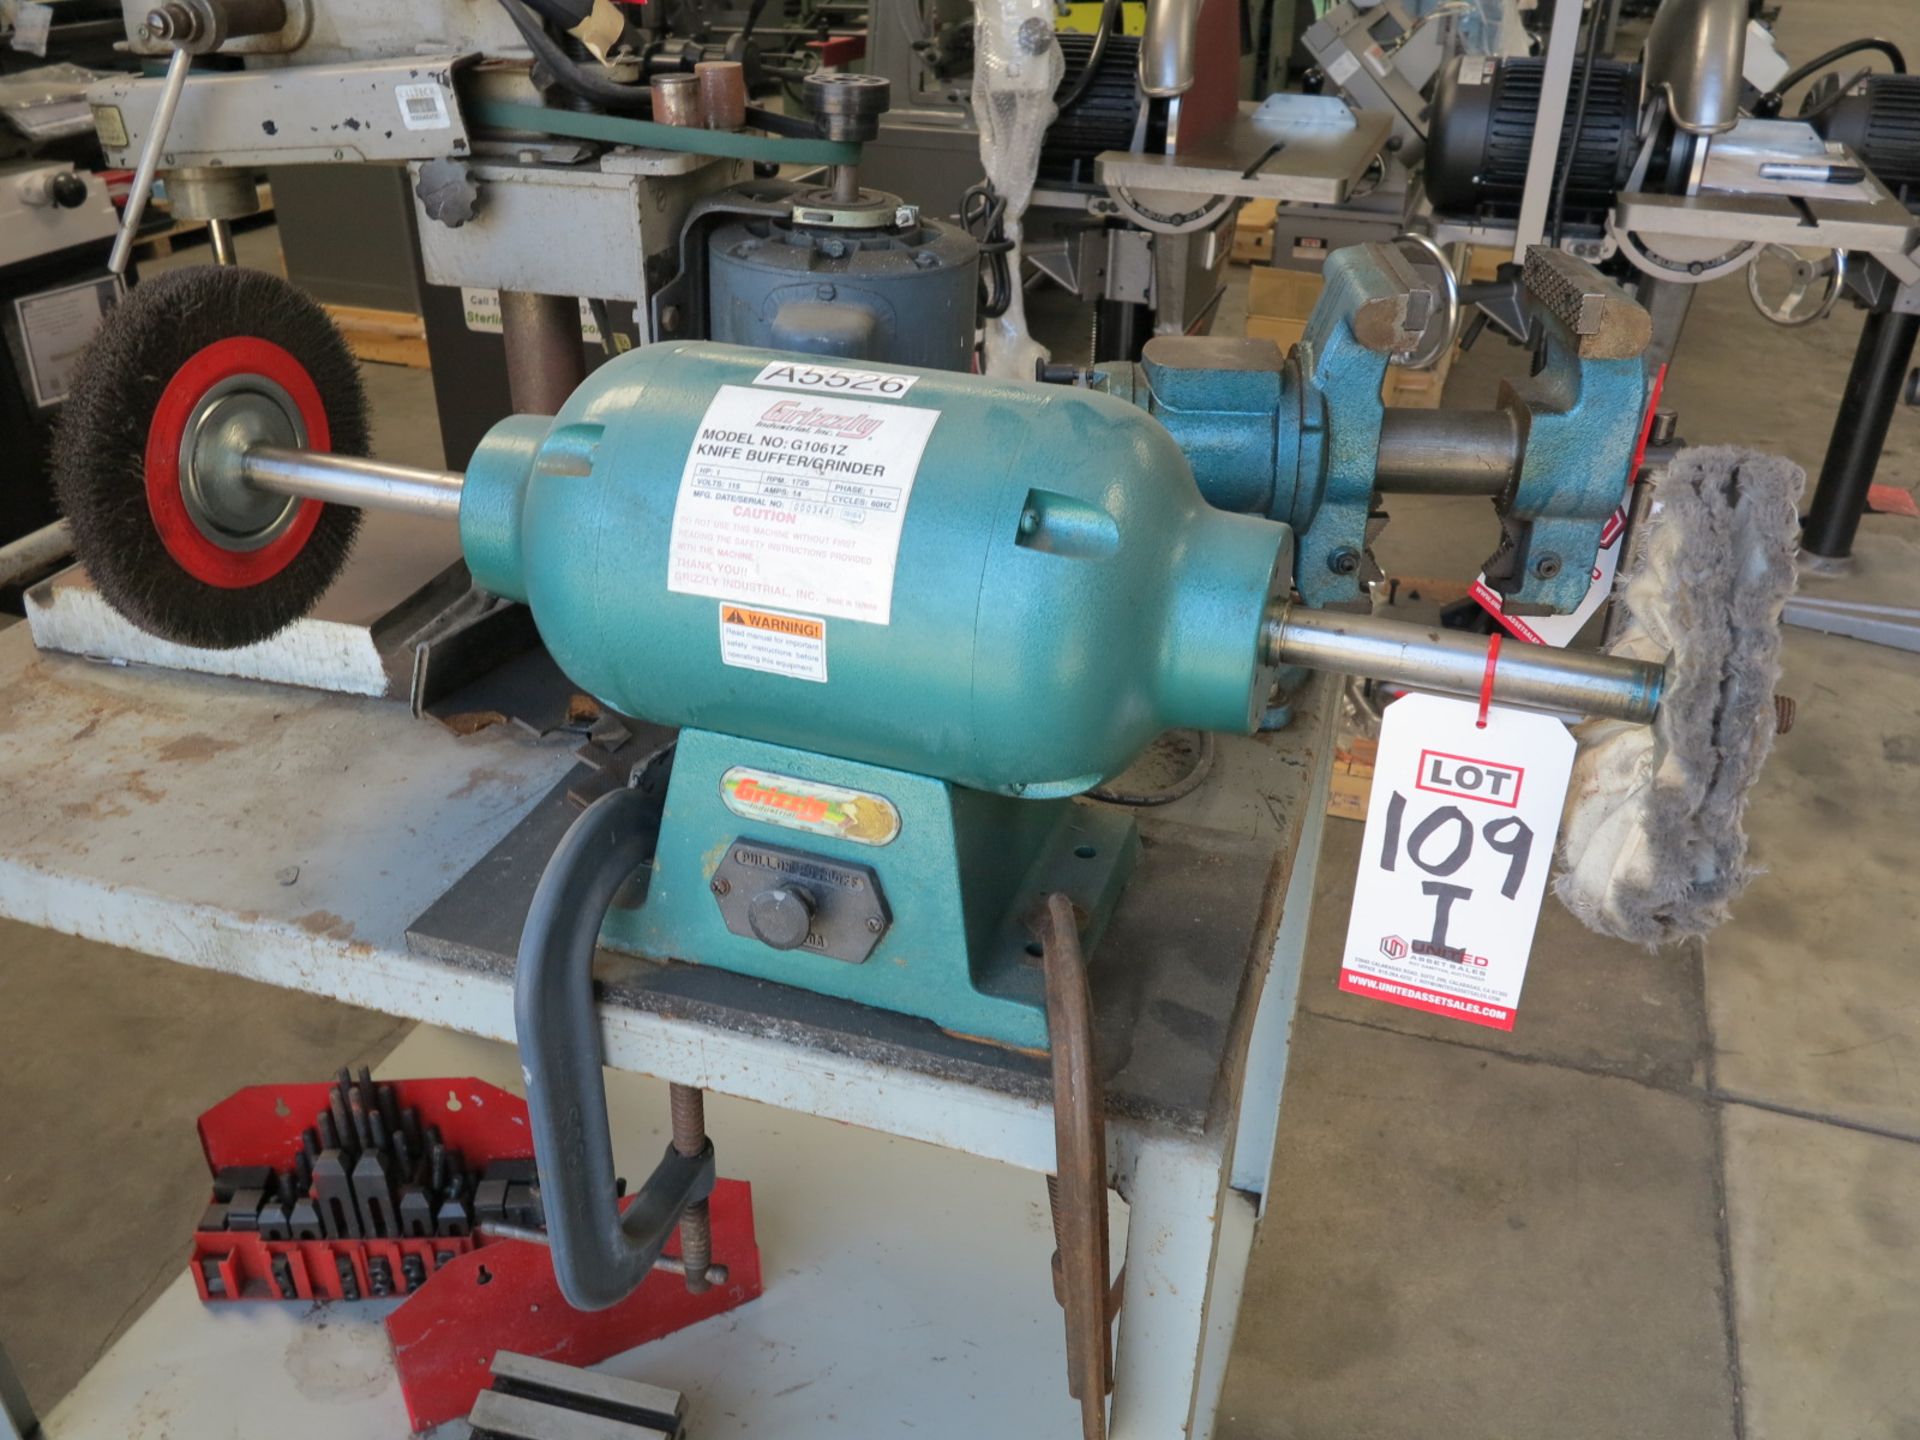 GRIZZLY KNIFE BUFFER/GRINDER, MODEL G10617, 1 HP (LOCATION: RUSH ST., SOUTH EL MONTE, CA)